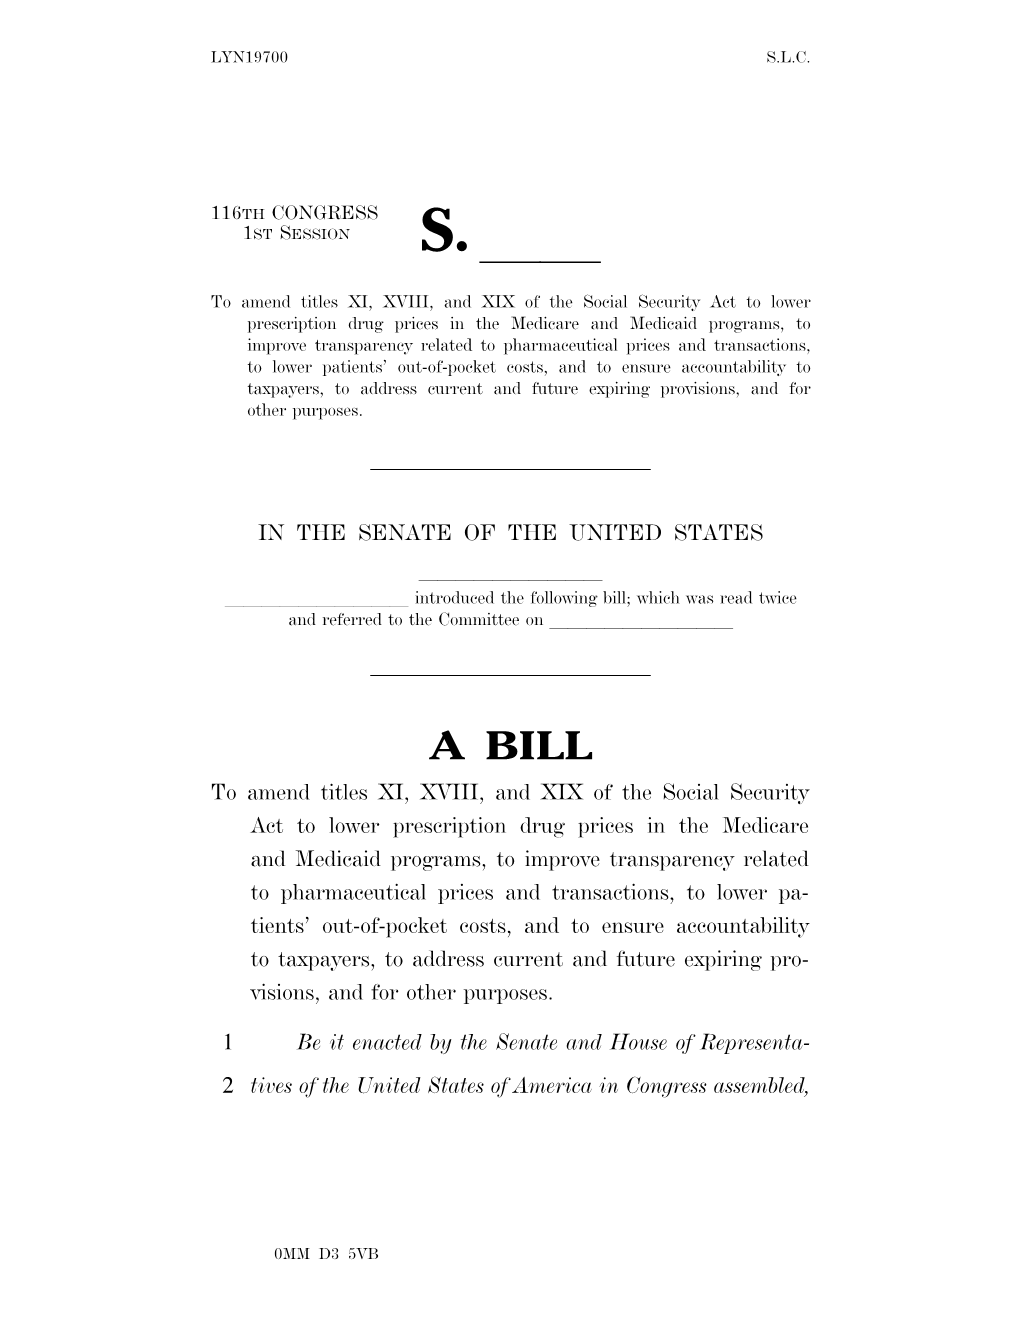 Prescription Drug Pricing Reduction Act of 2019’’